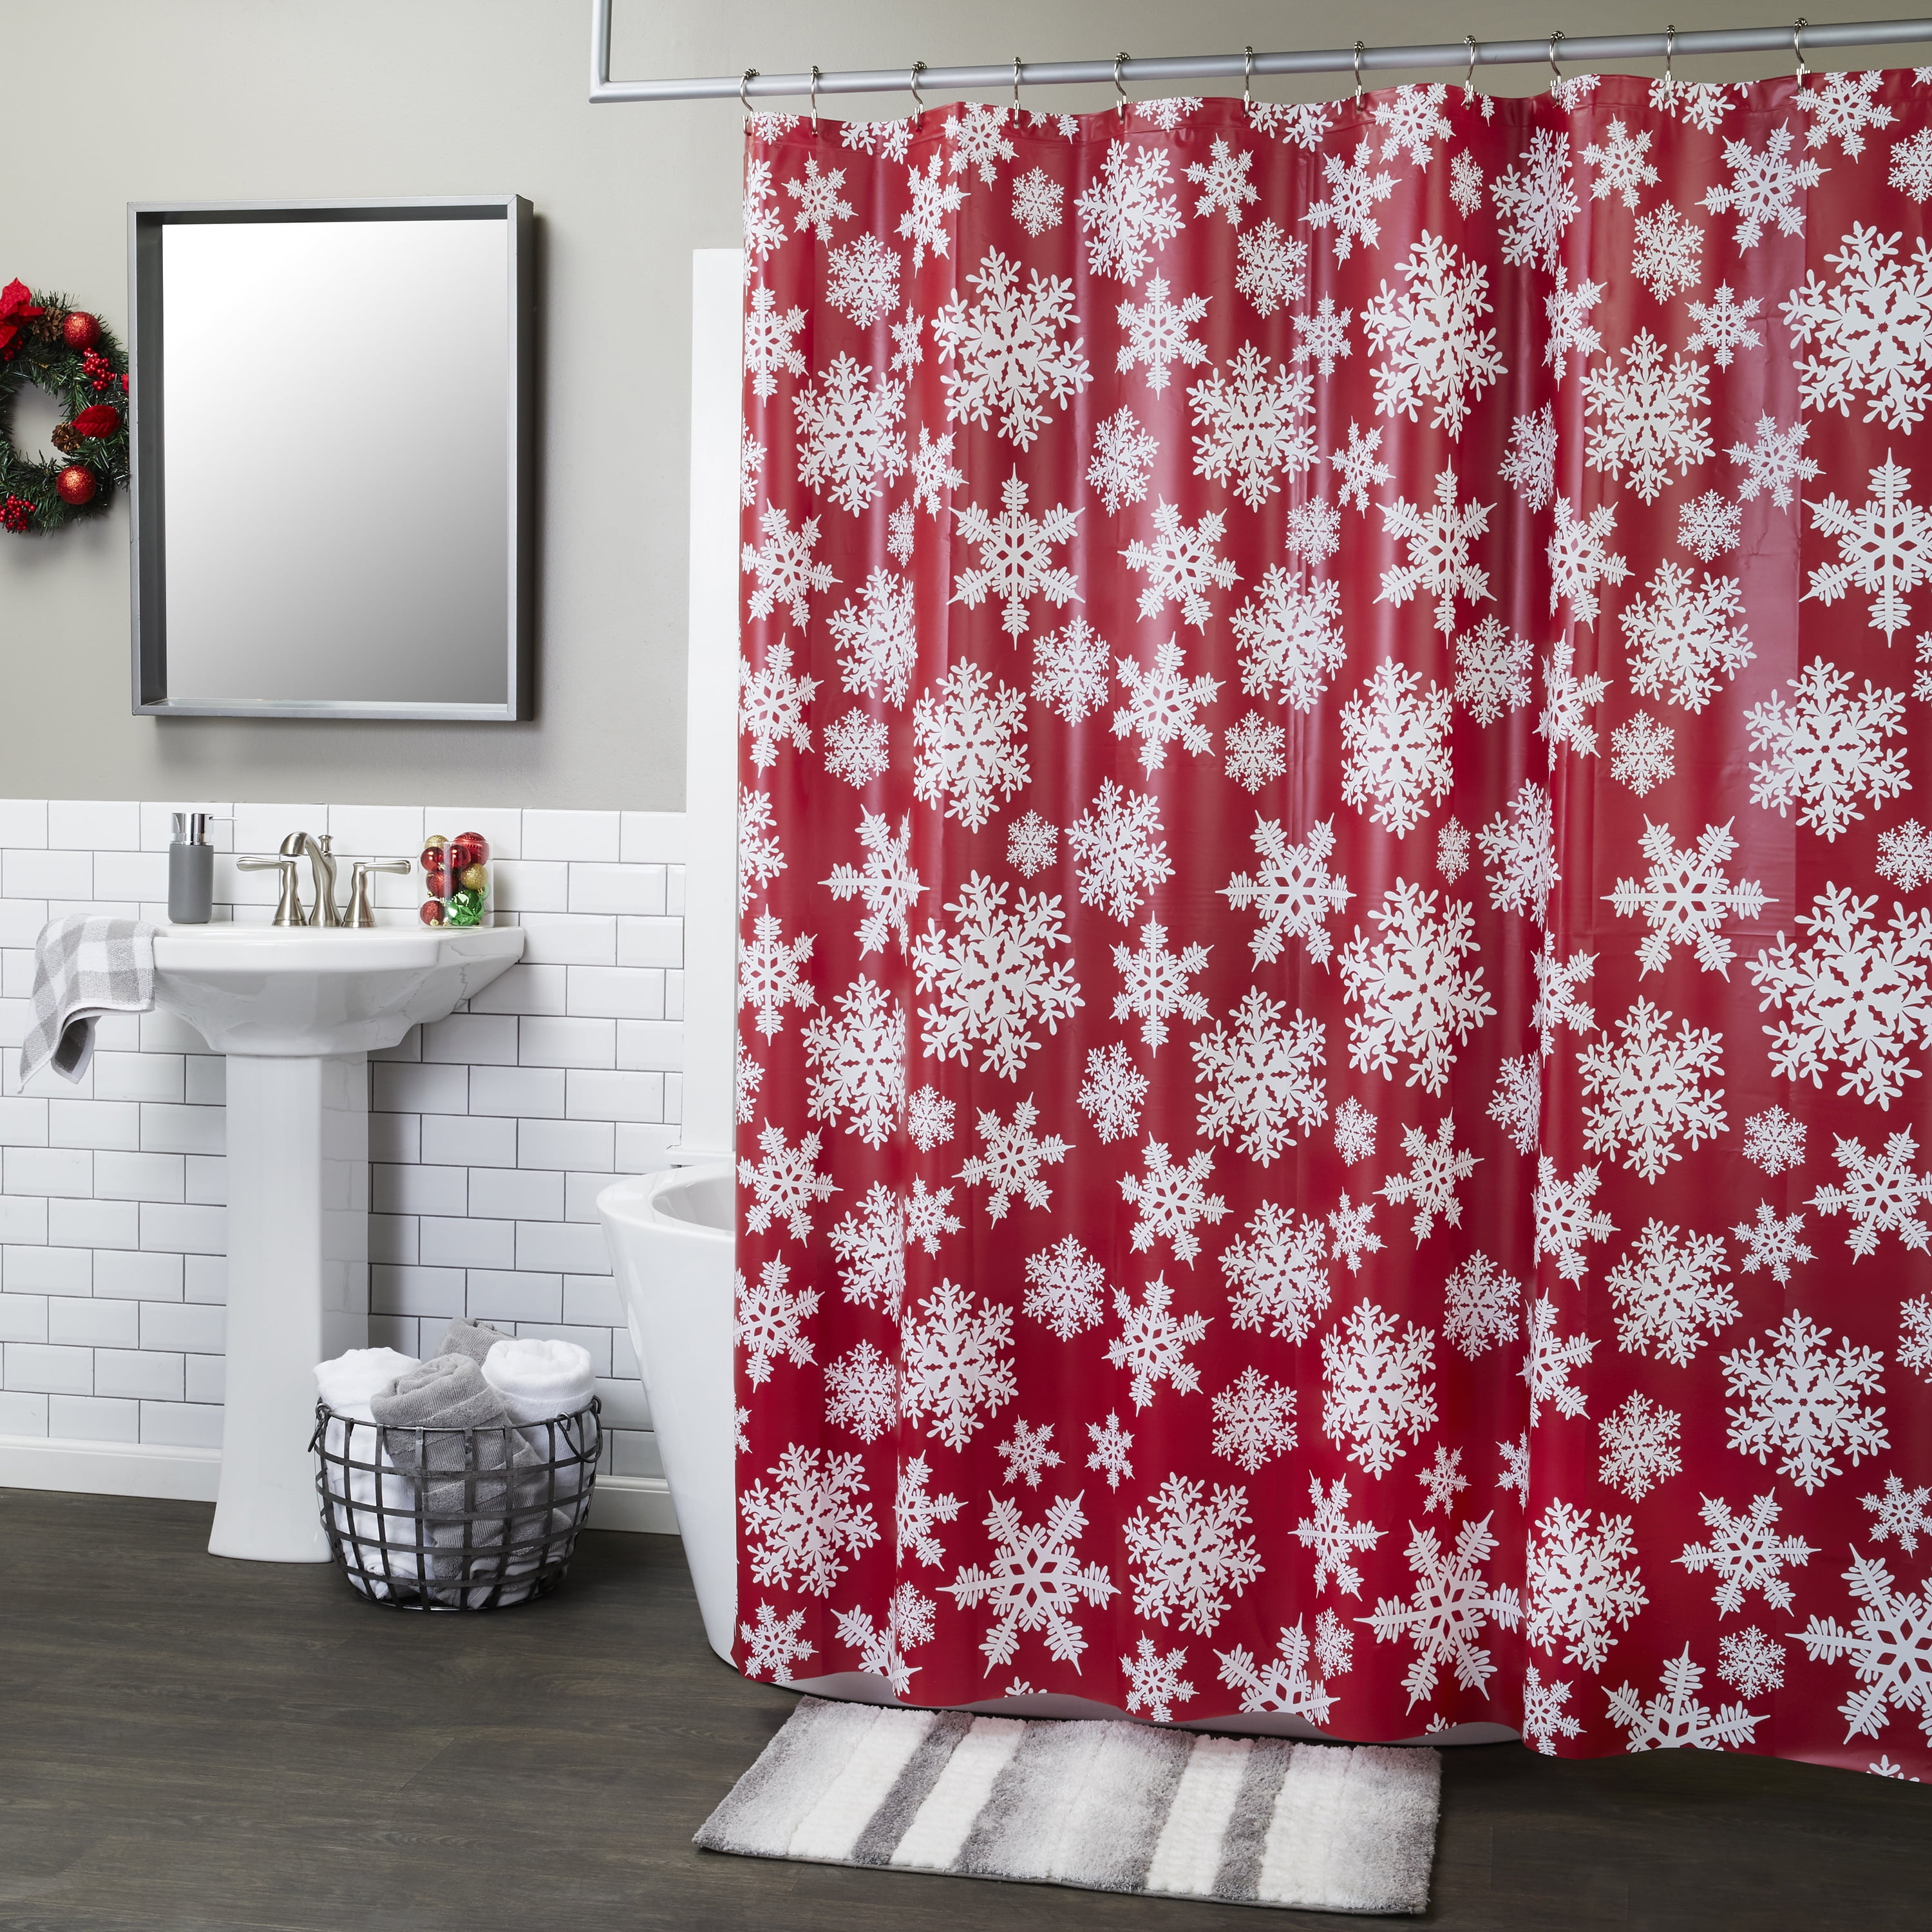 Single Shower Curtain, Red And White Snowflake Shower Curtain